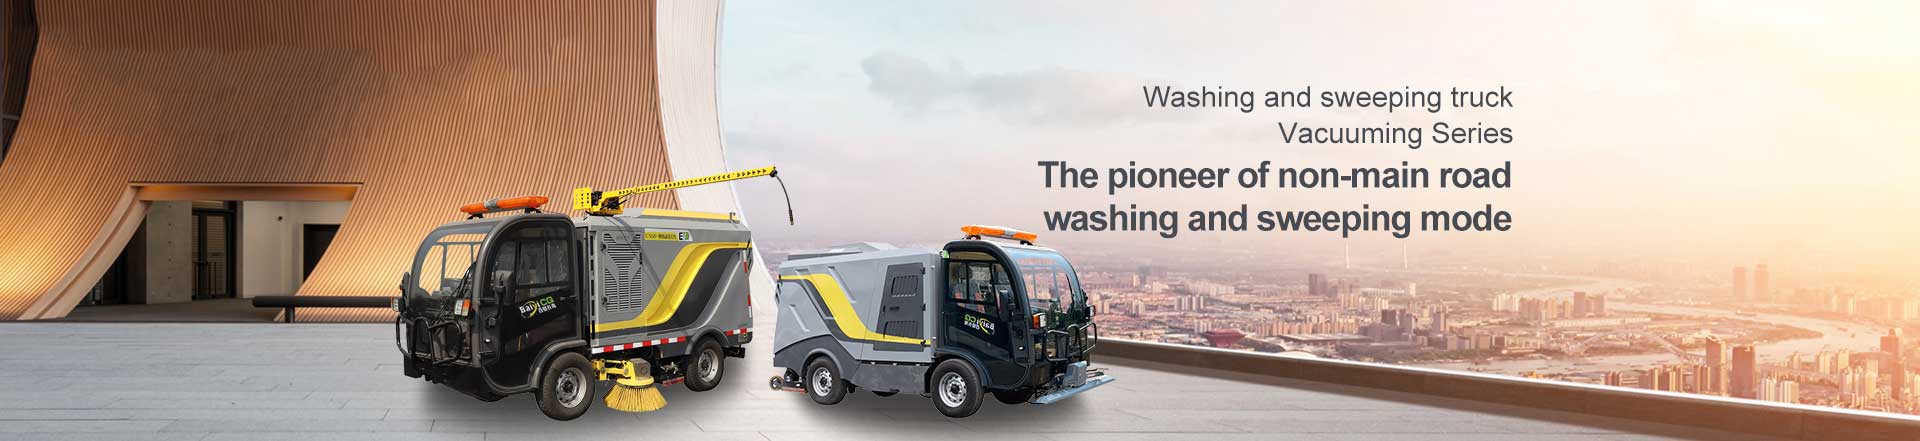 Electric sweeper, washing and sweeping truck, sanitation small street sweeper